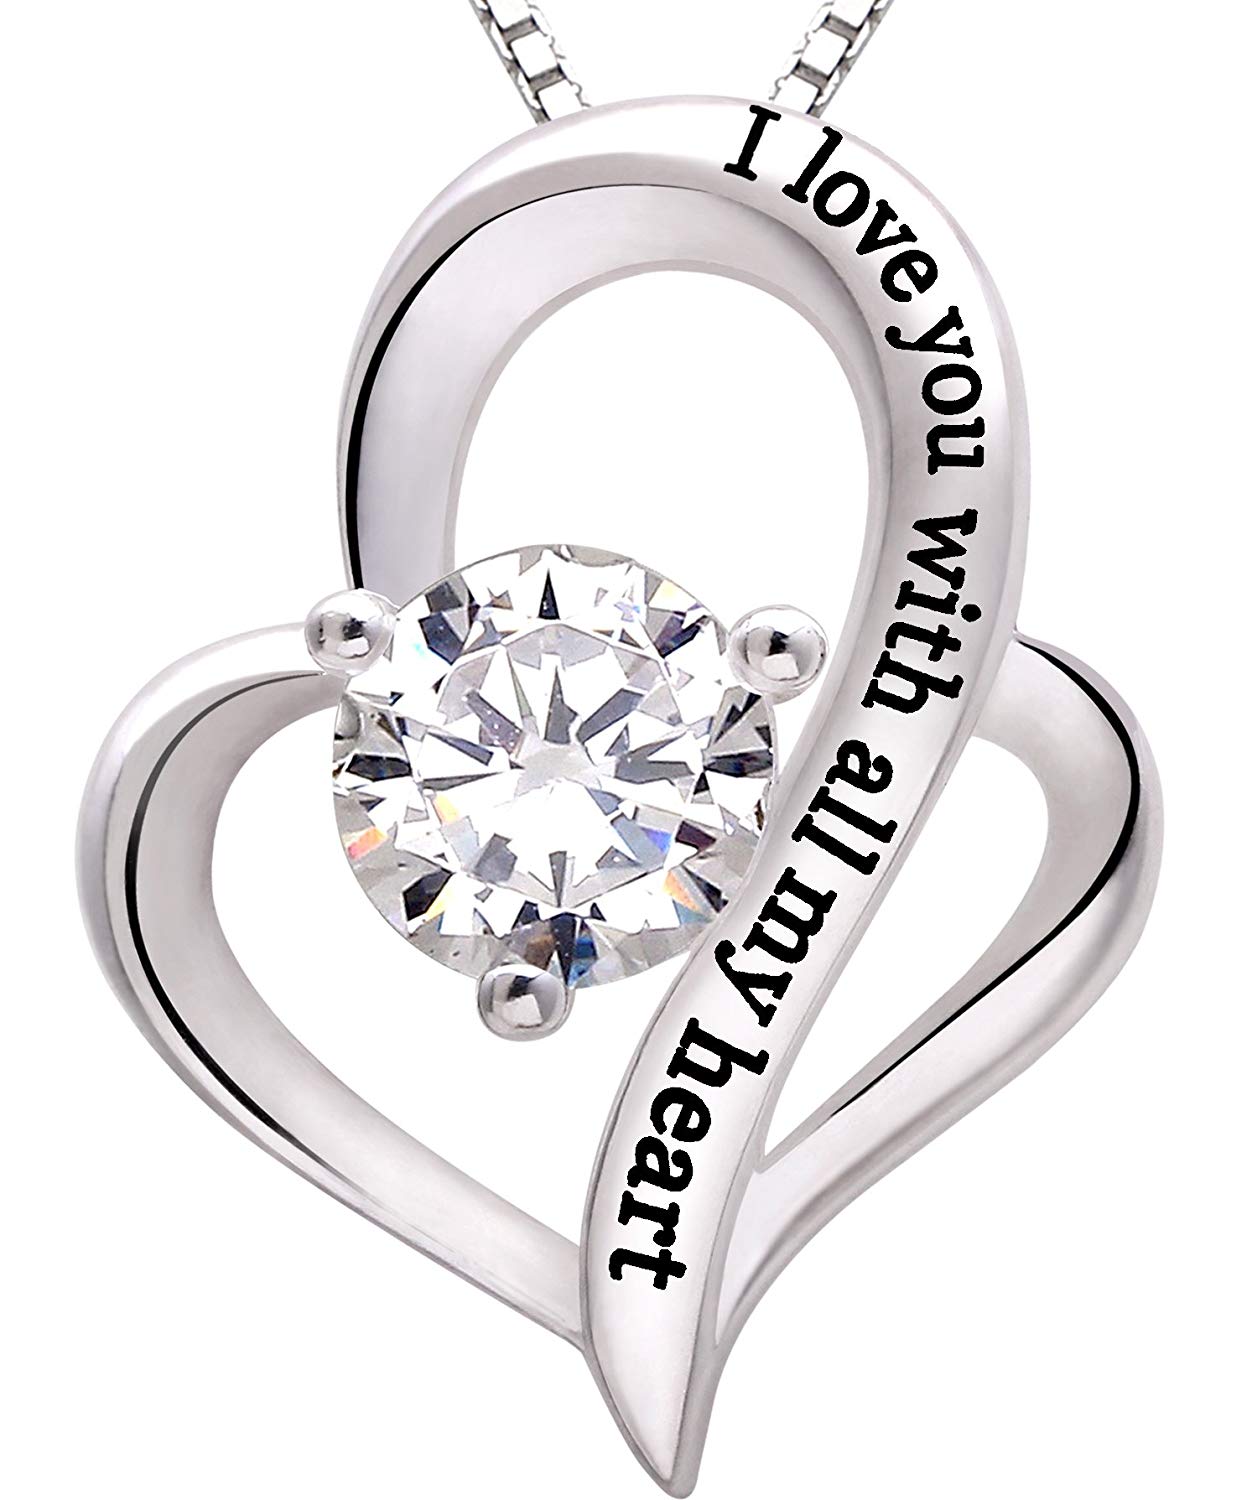 I Loe You With All My Heart Heart Necklacein 18k White Gold Filled